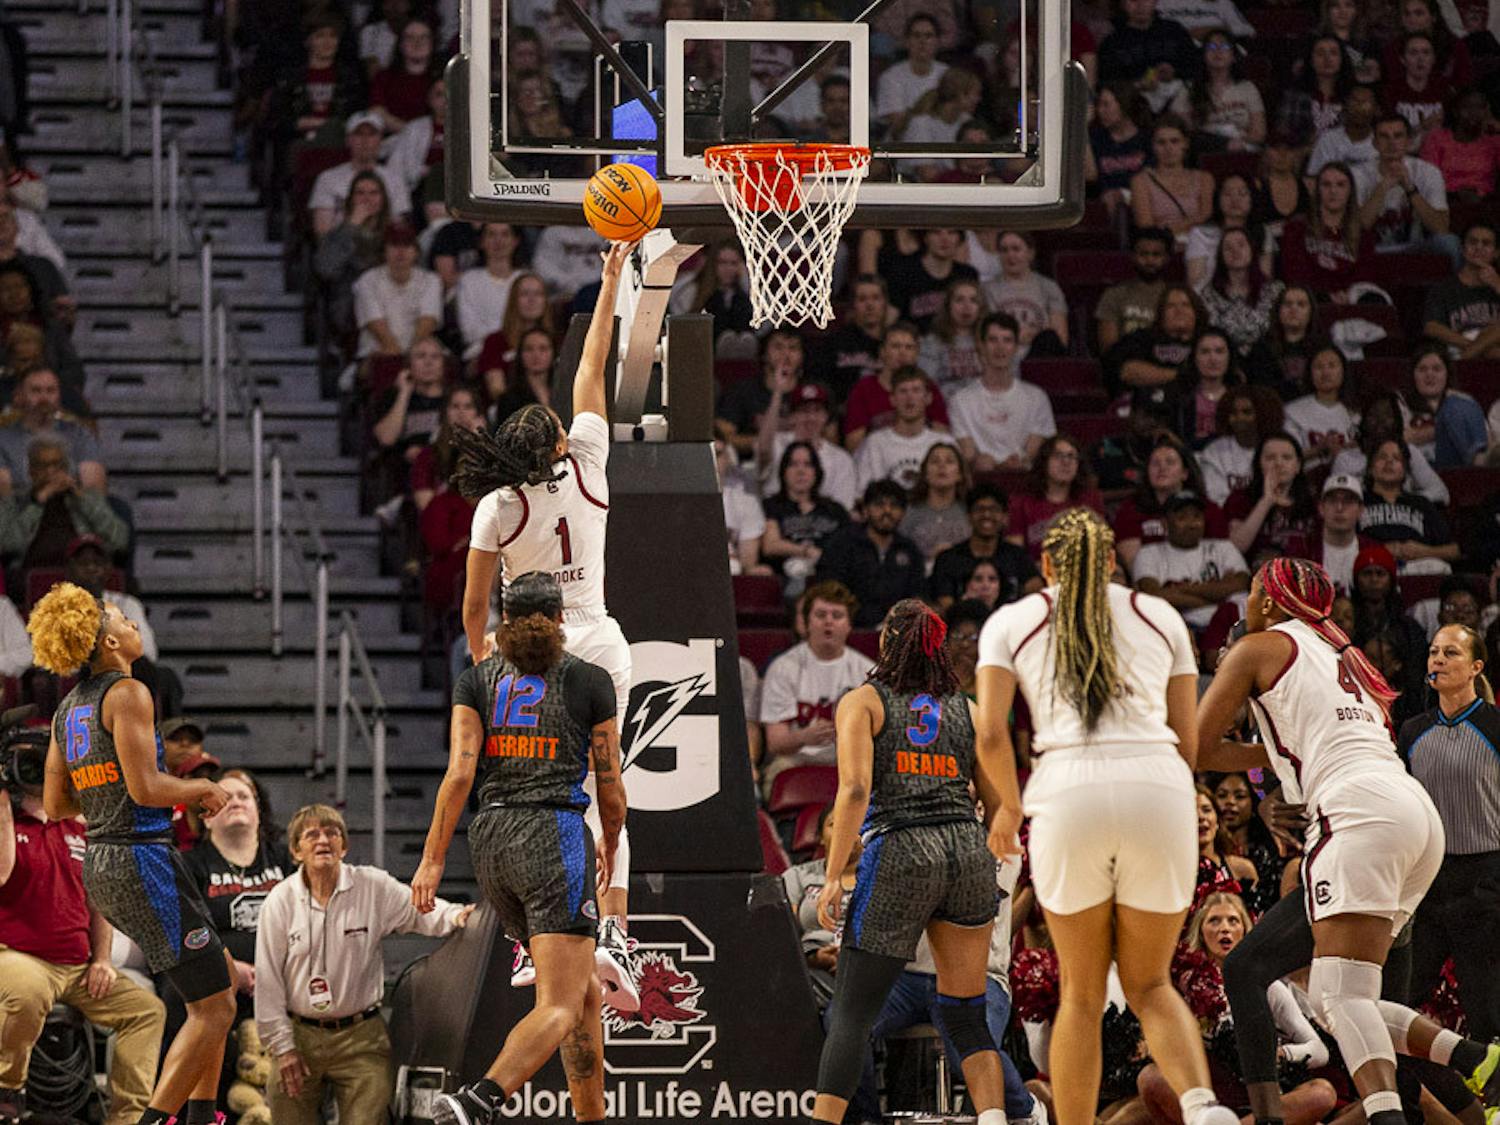 Senior guard Zia Cook goes in for a layup during the matchup between South Carolina and Florida at Colonial Life Arena on Feb. 16, 2023. The Gamecocks beat the Gators 87-56.